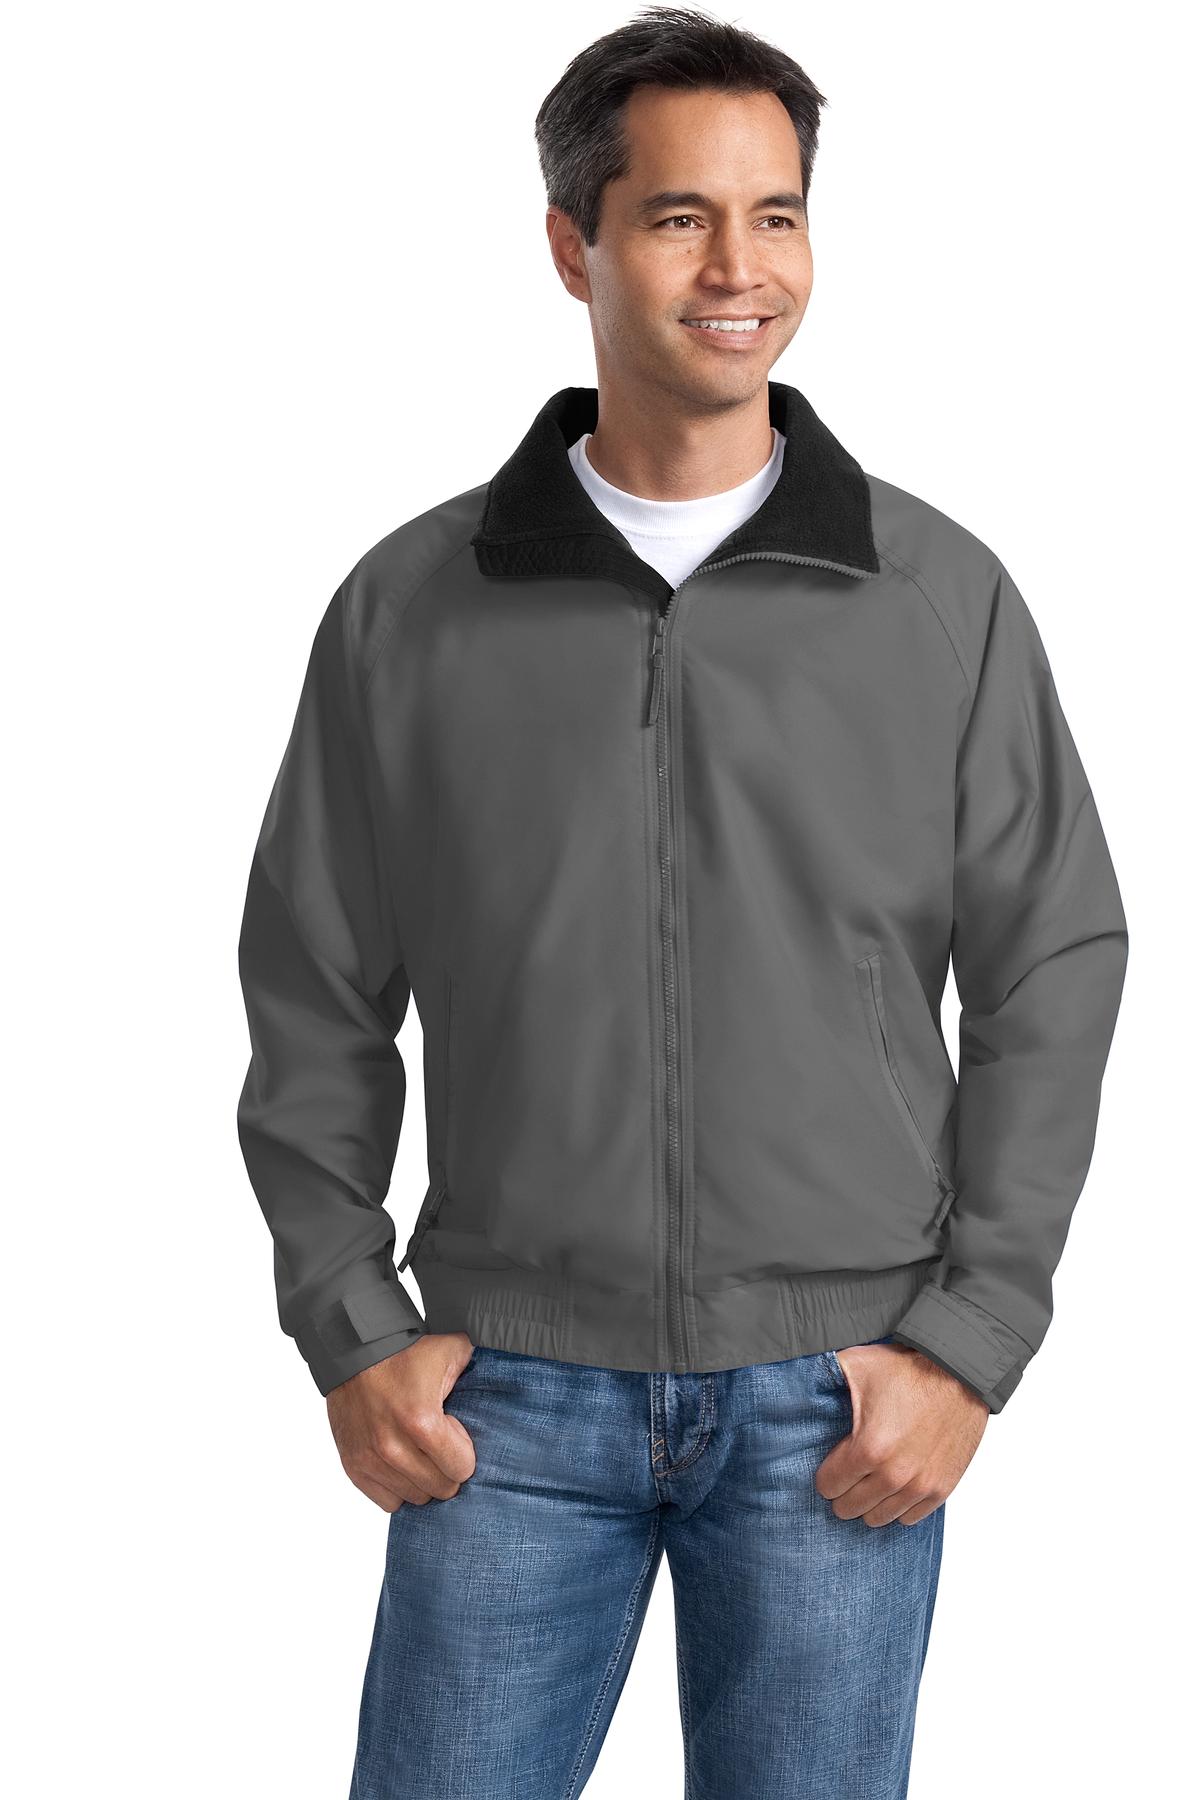 Port Authority - Competitor Jacket. JP54